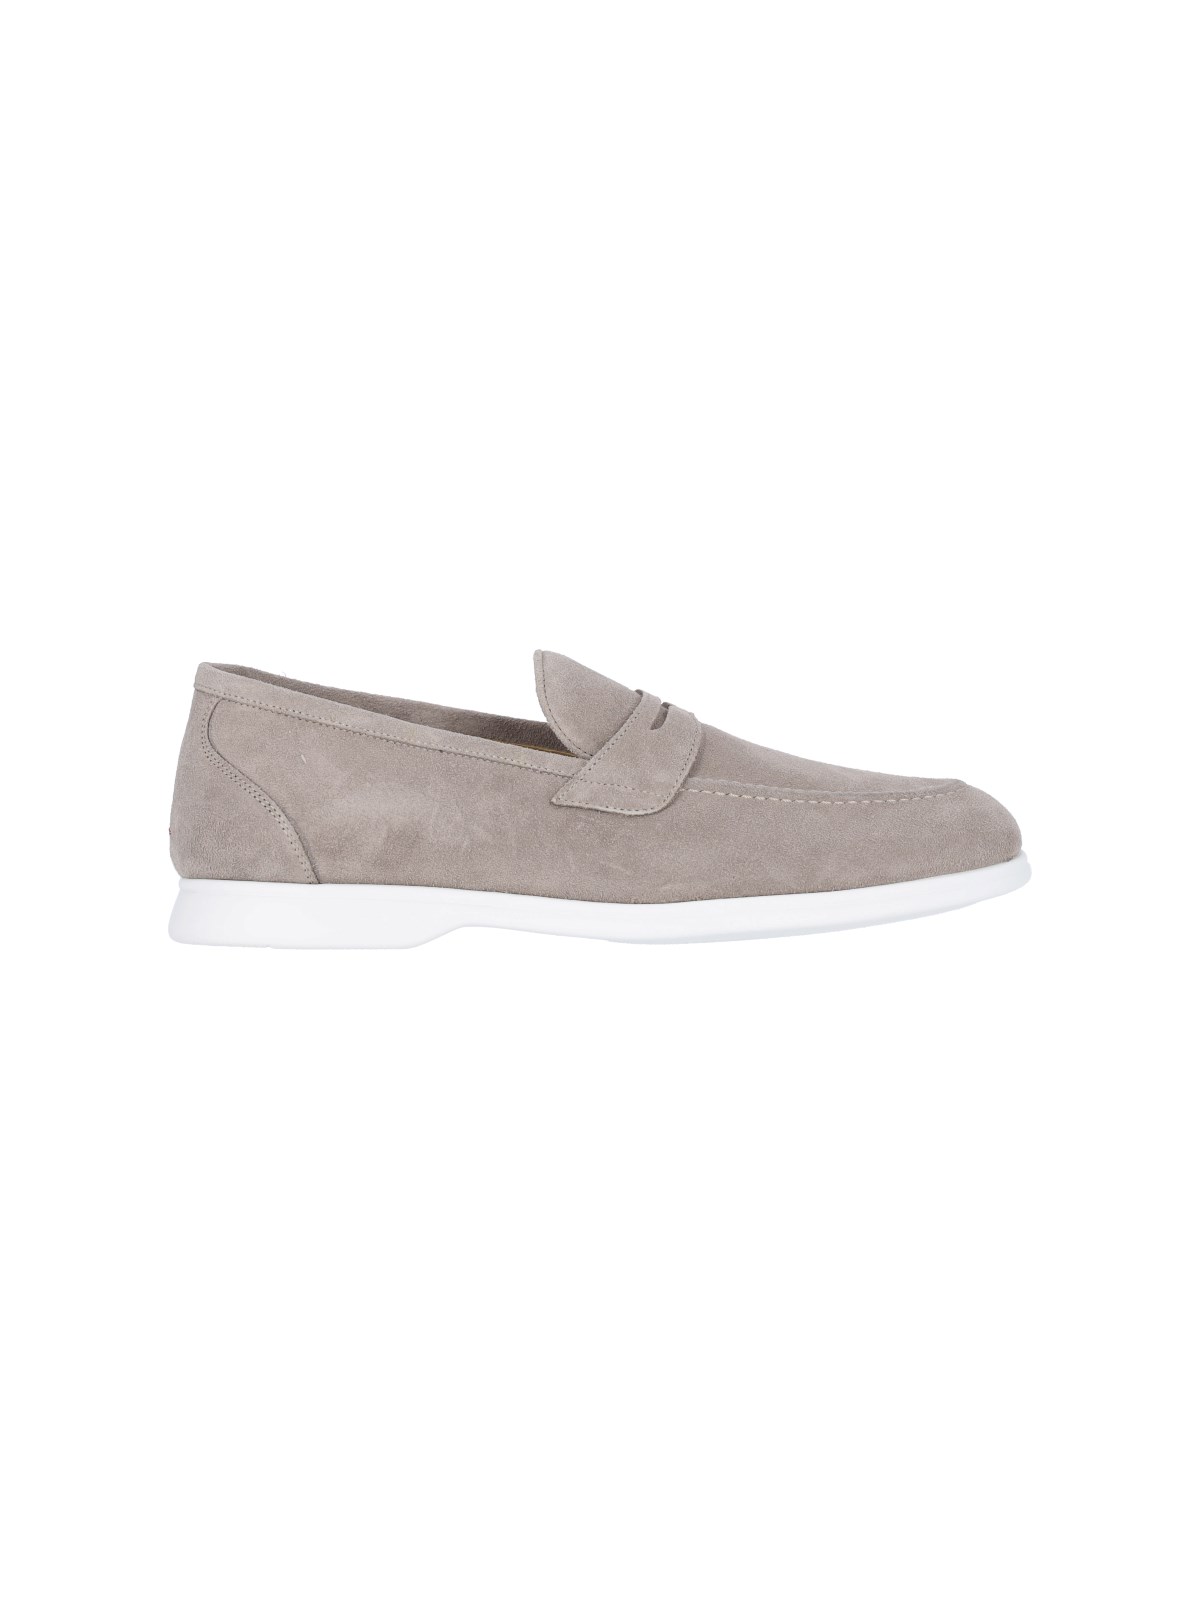 Kiton Suede Loafers In Taupe